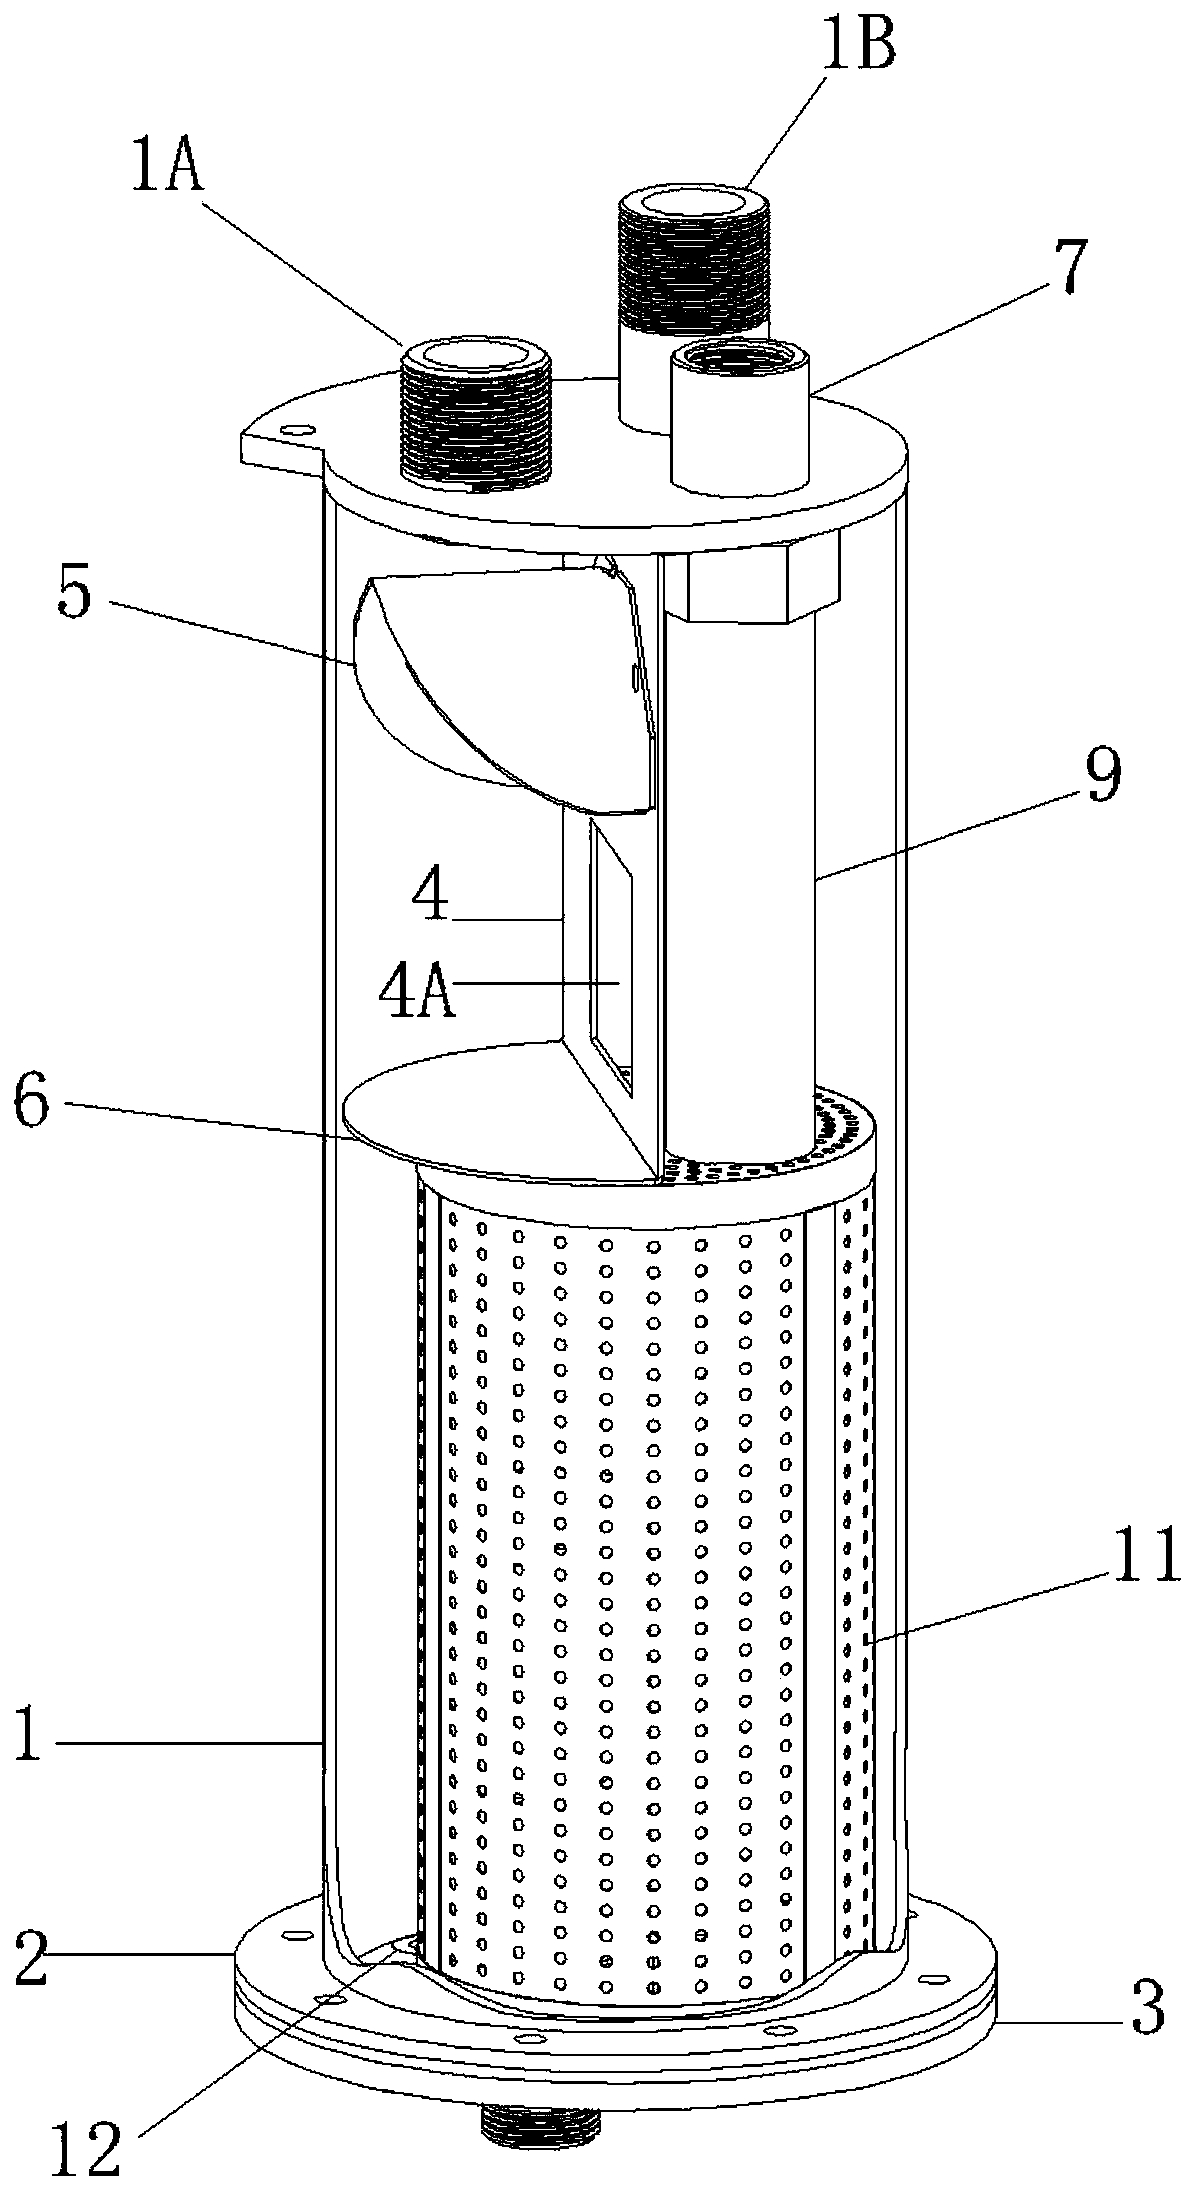 Steam-water separator with water level control function